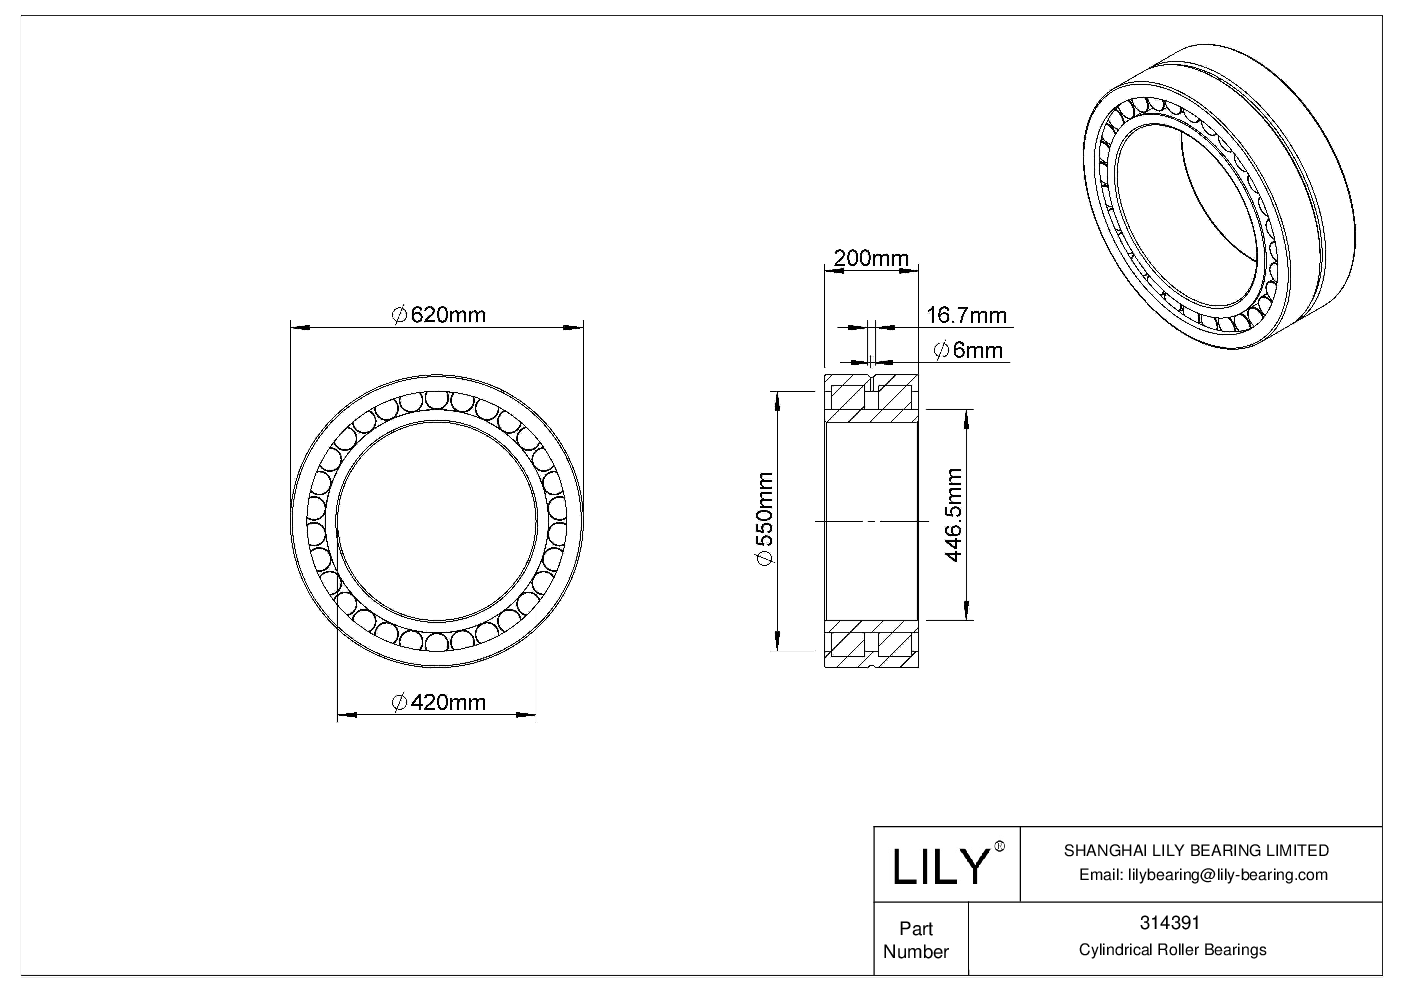 314391 Double Row Cylindrical Roller Bearings cad drawing